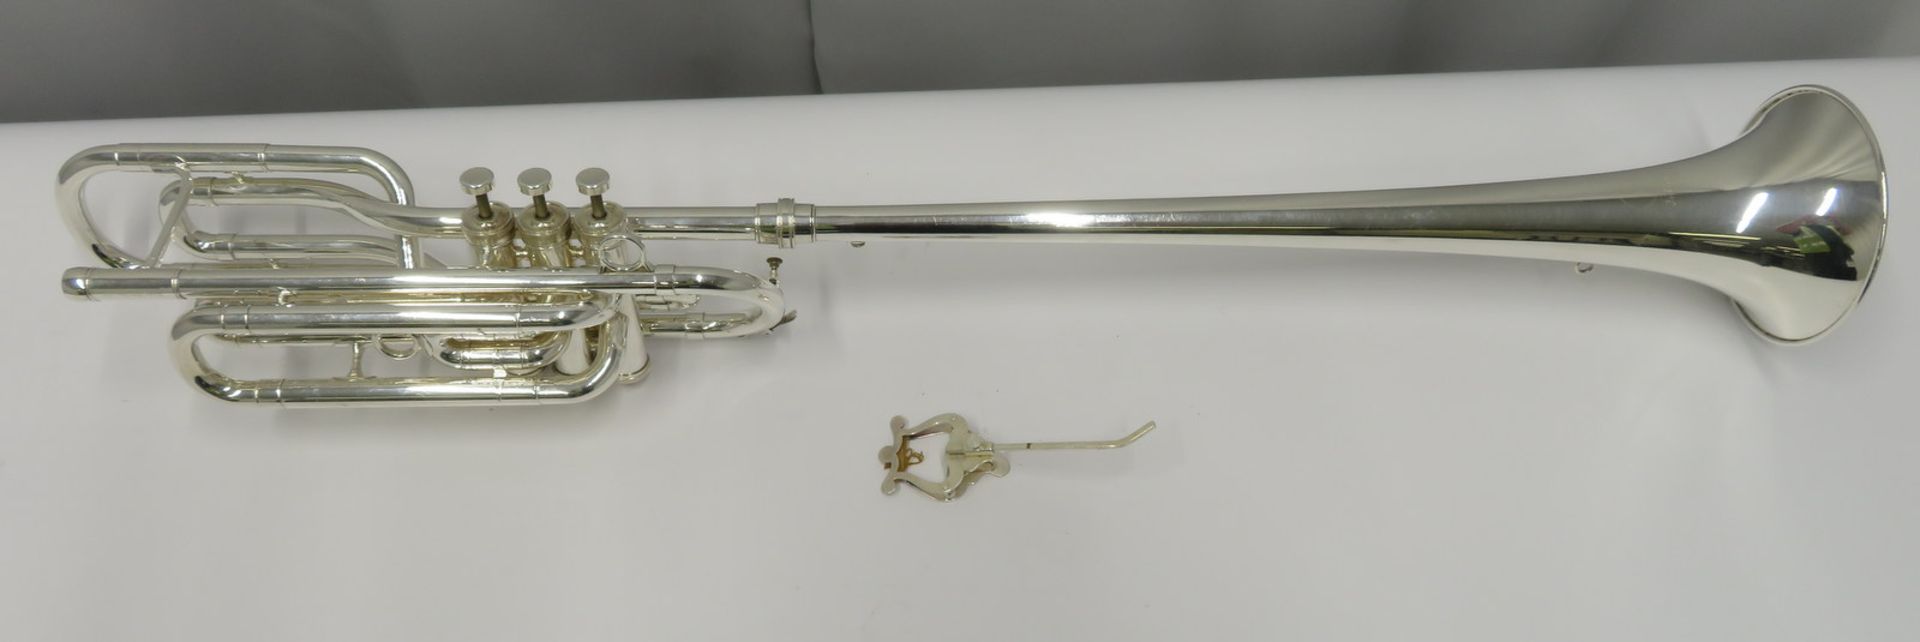 Besson International BE708 fanfare trumpet with case. Serial number: 887800. - Image 4 of 14